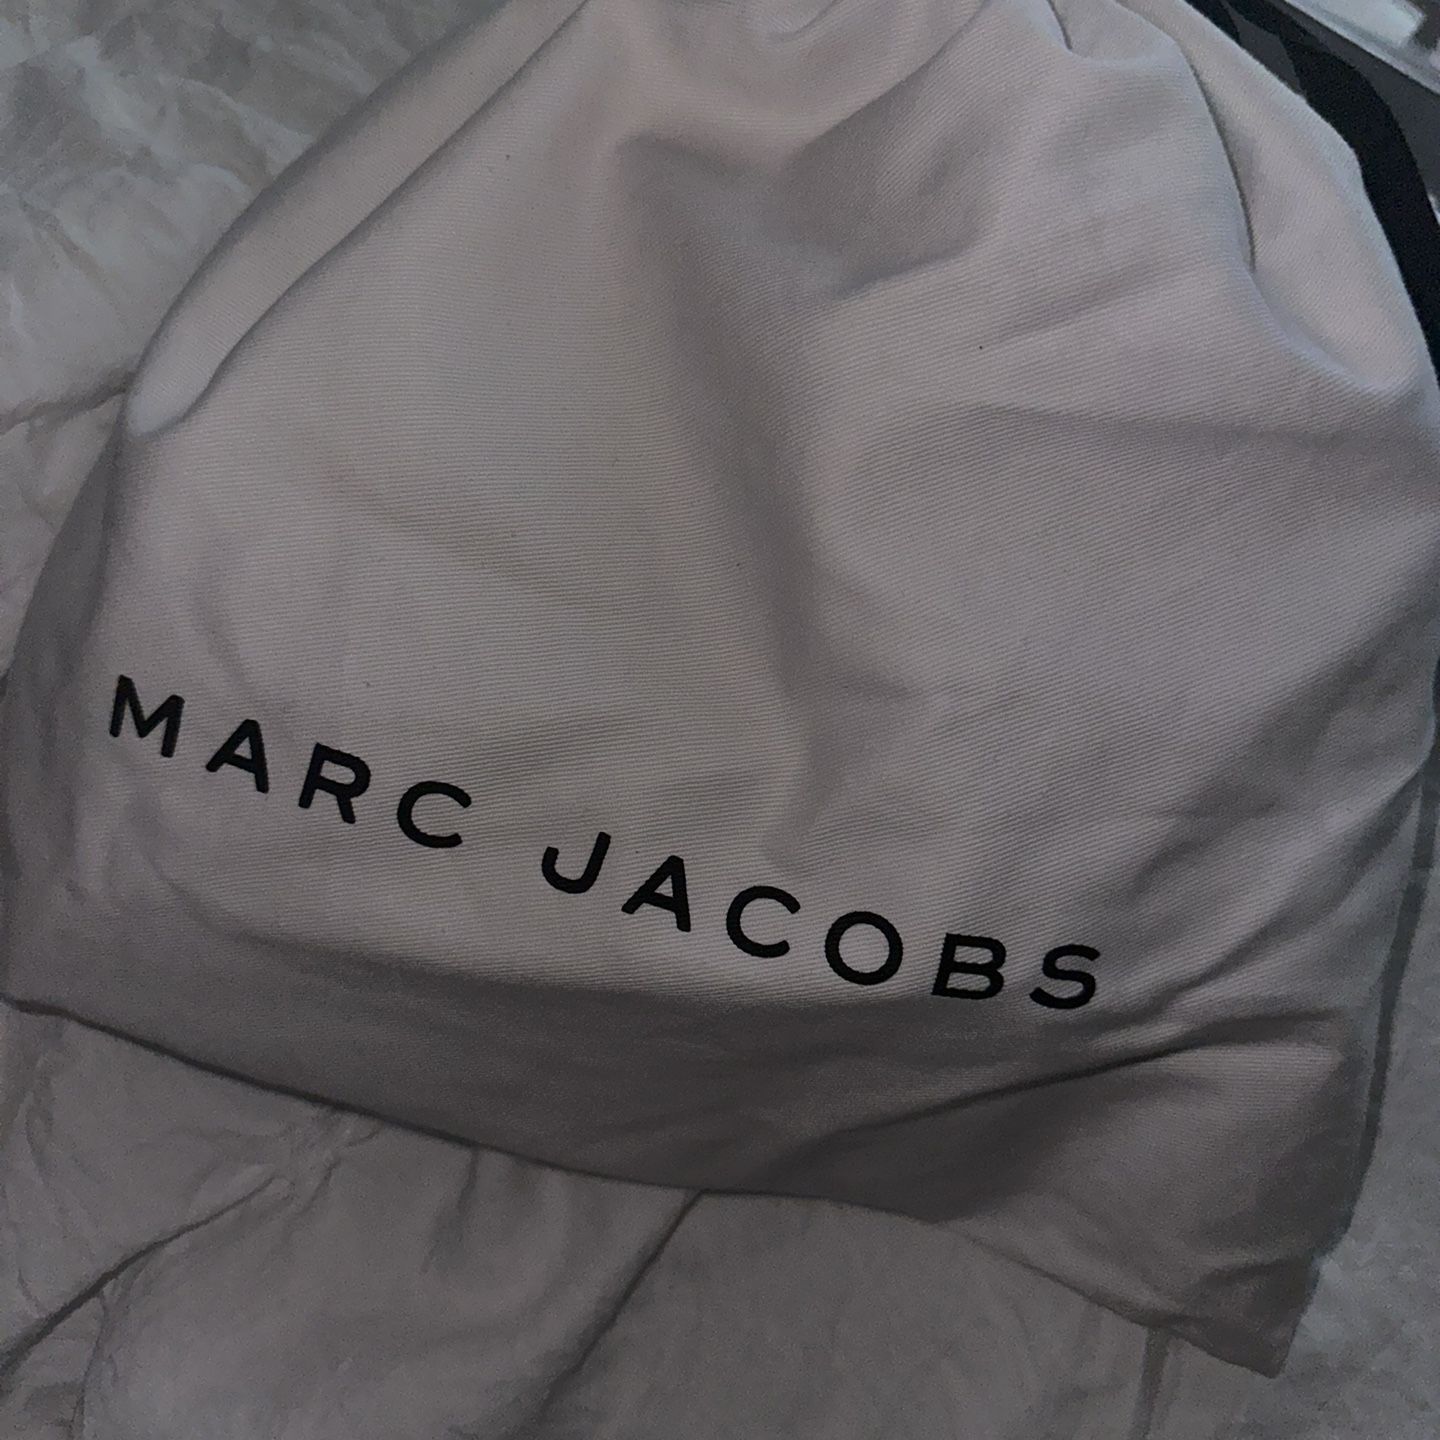 MARC JACOBS CROSS BODY LEATHER PURSE